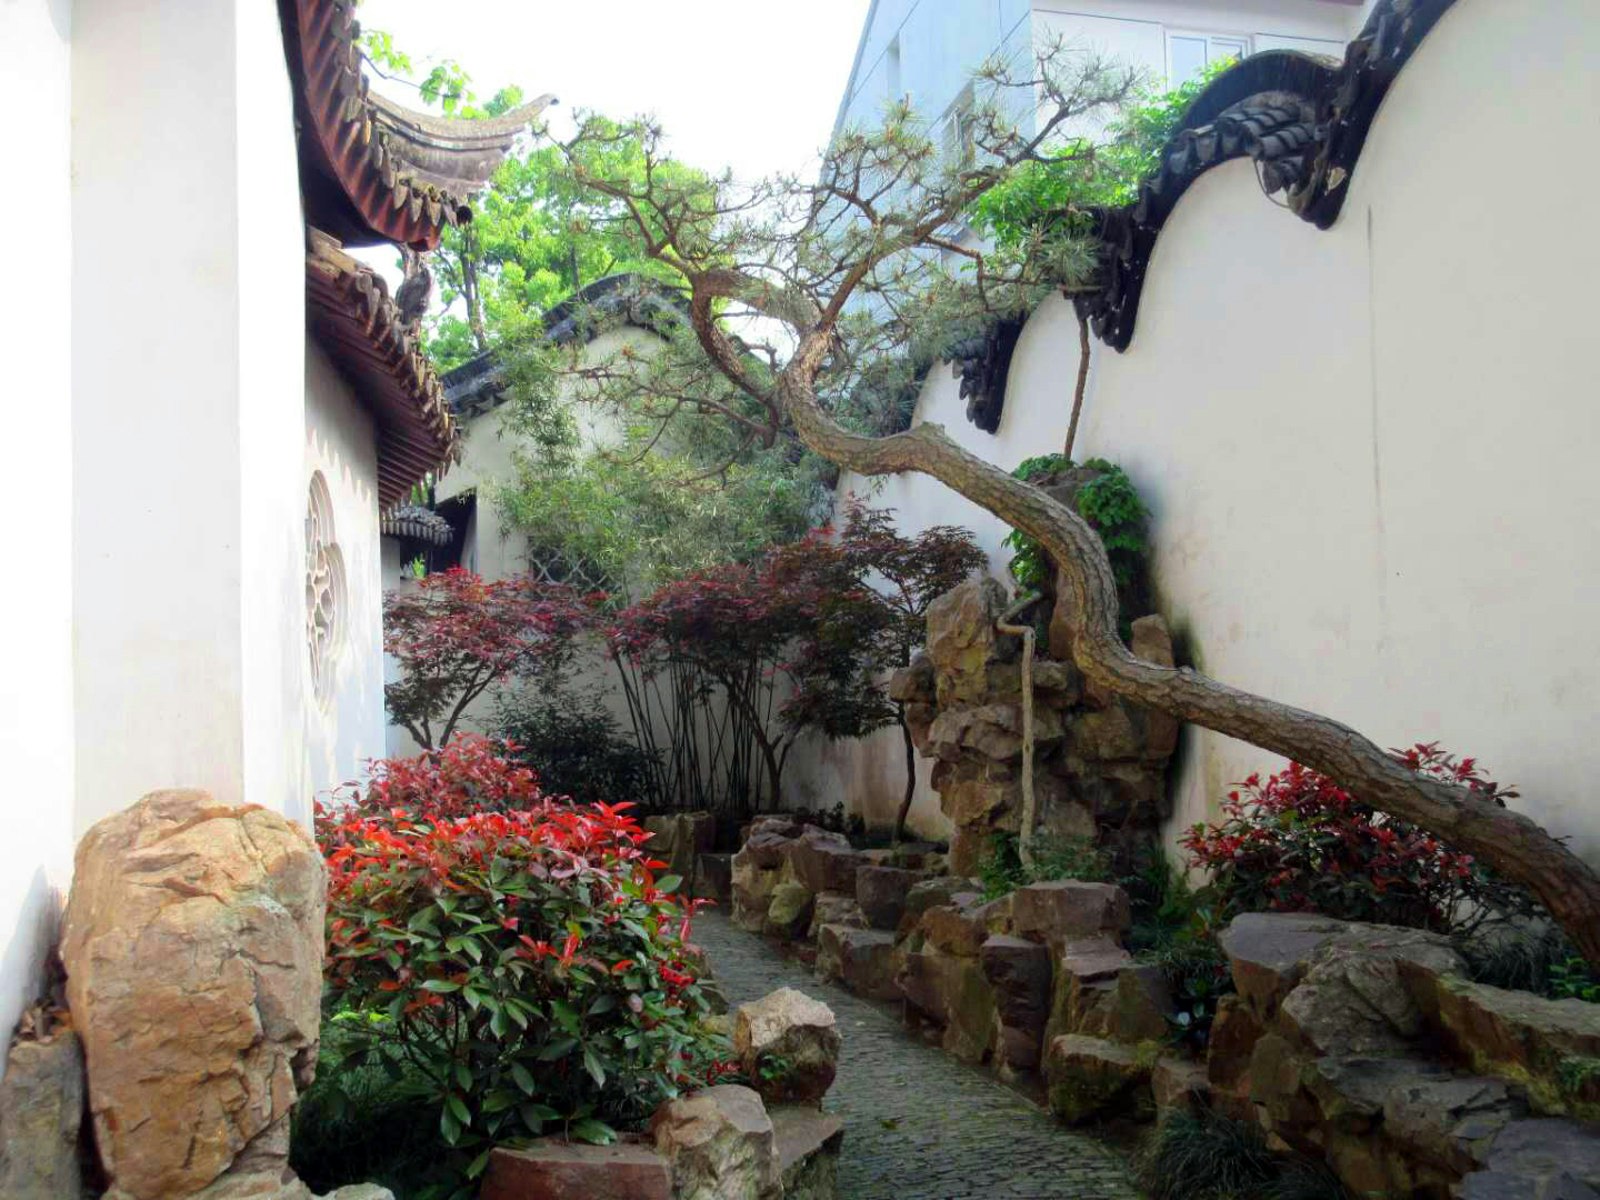 Small shrubs with red flowers and a gnarled tree decorate a narrow passageway through the garden. Gardens were usually walled compounds that served as private residences for intellectuals and retired officials © Tess Humphrys / Lonely Planet